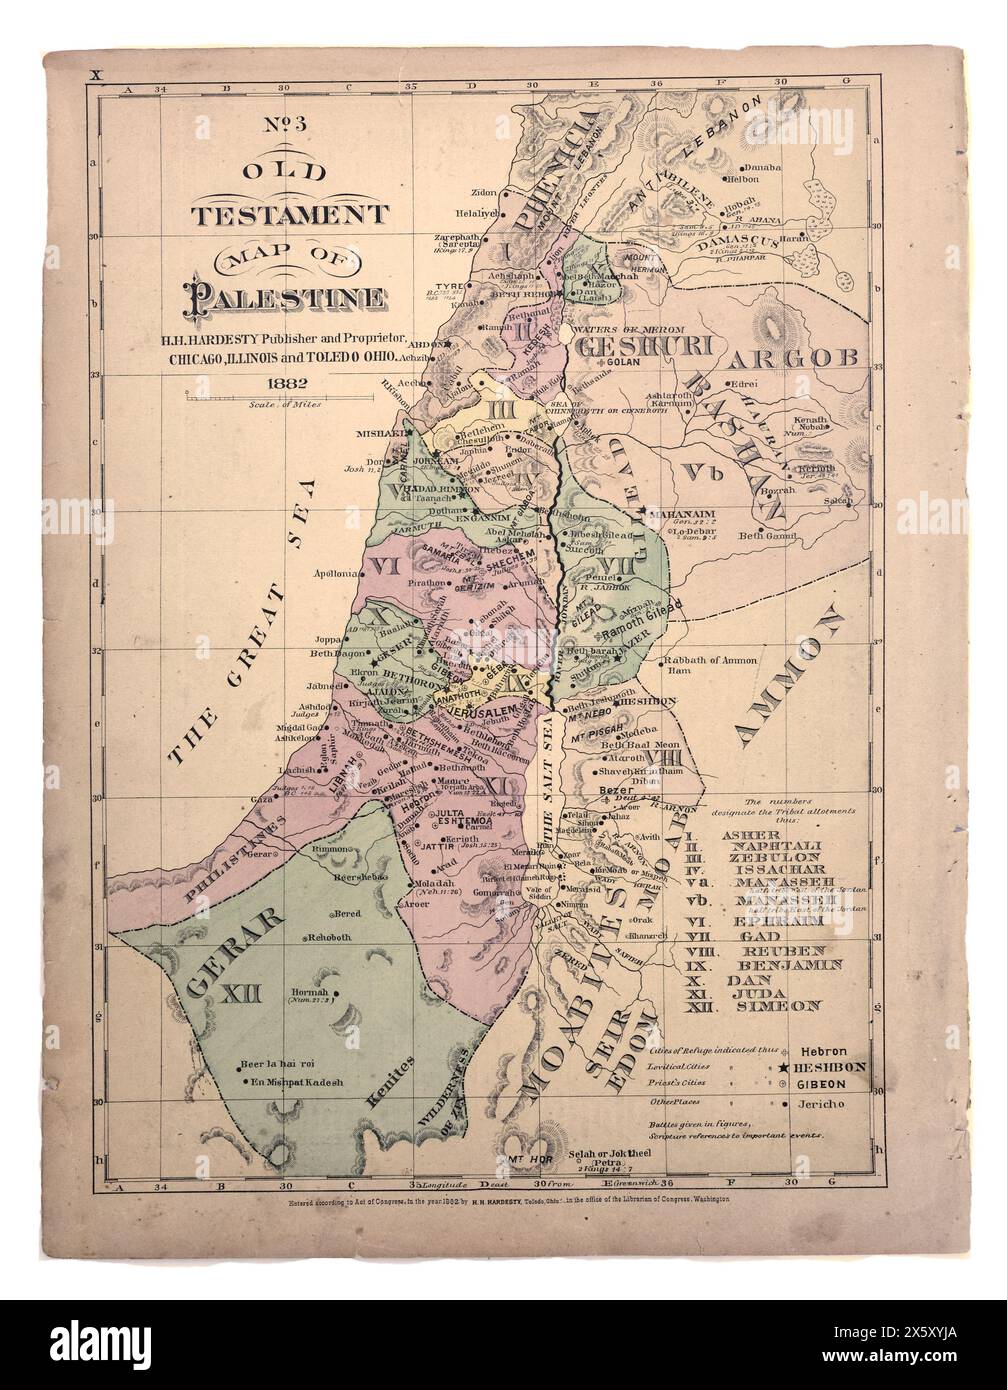 Ancient Biblical  map  of Palestine. Stock Photo